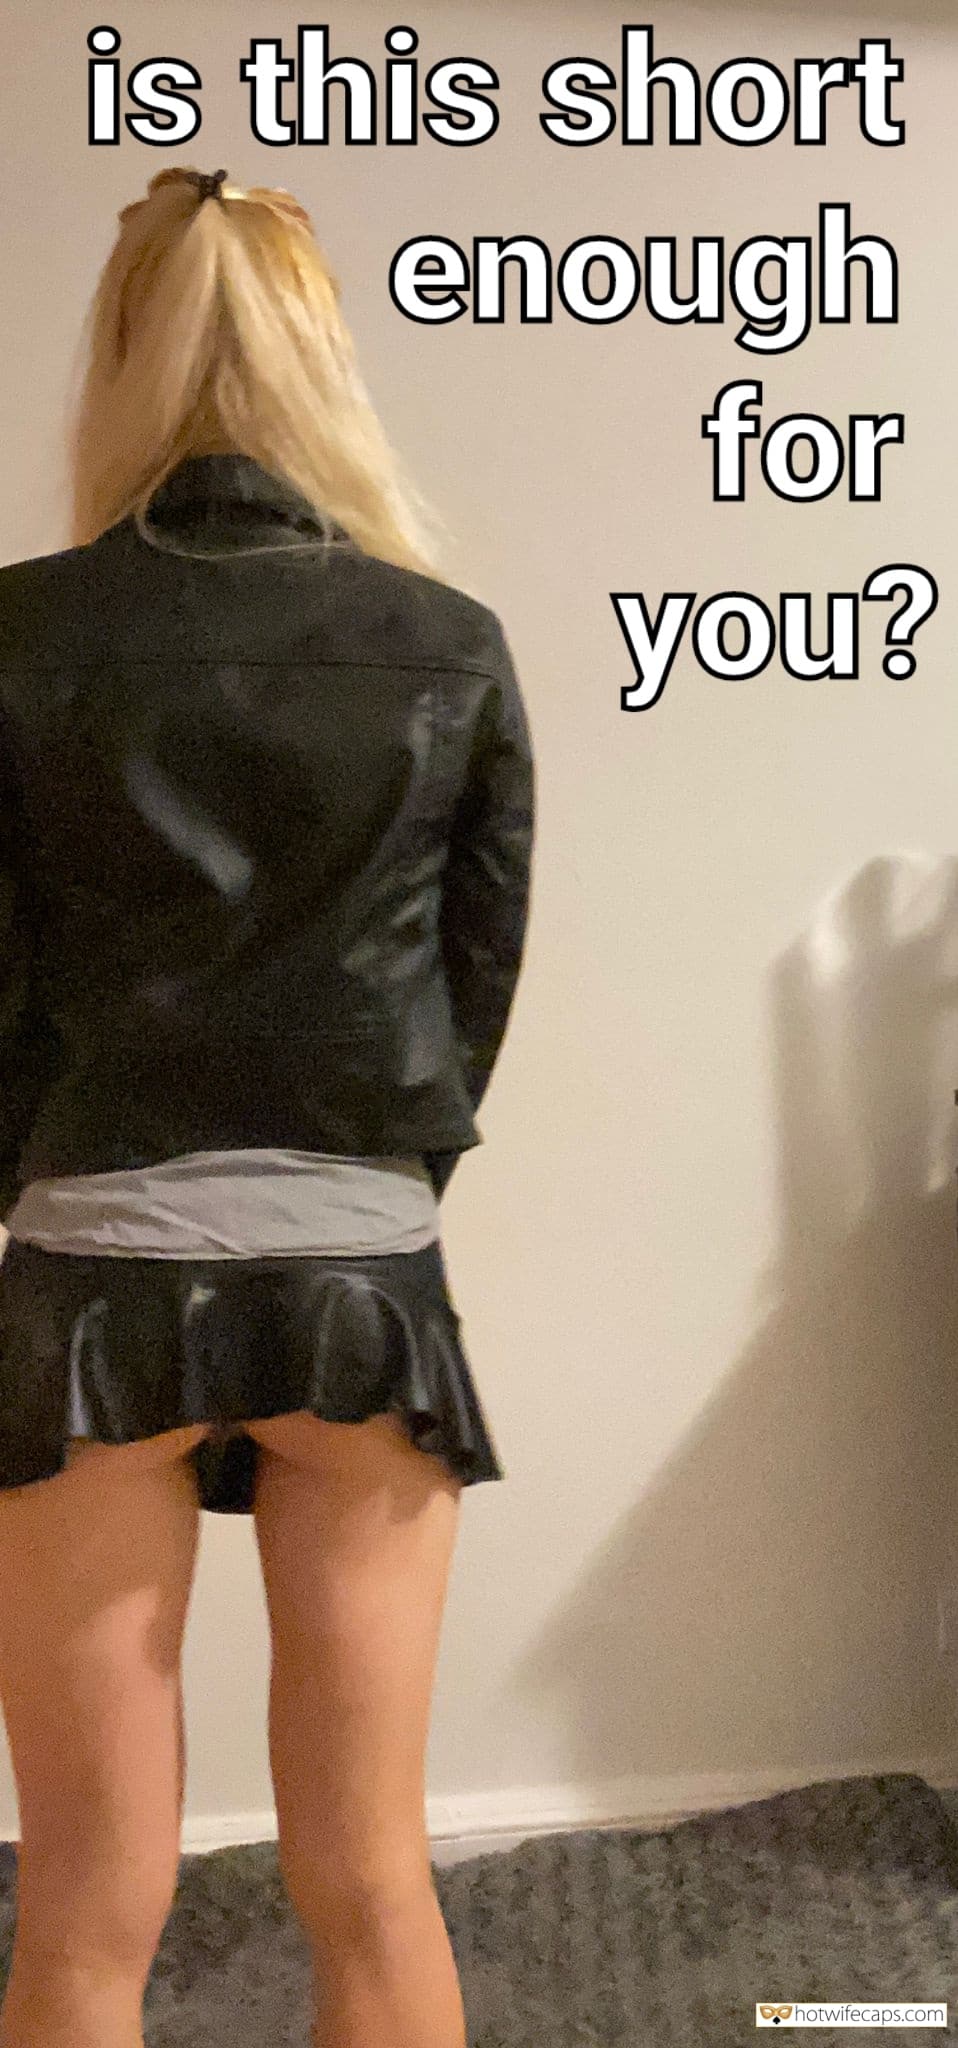 short skirt no panties captions, memes and dirty quotes on HotwifeCaps image